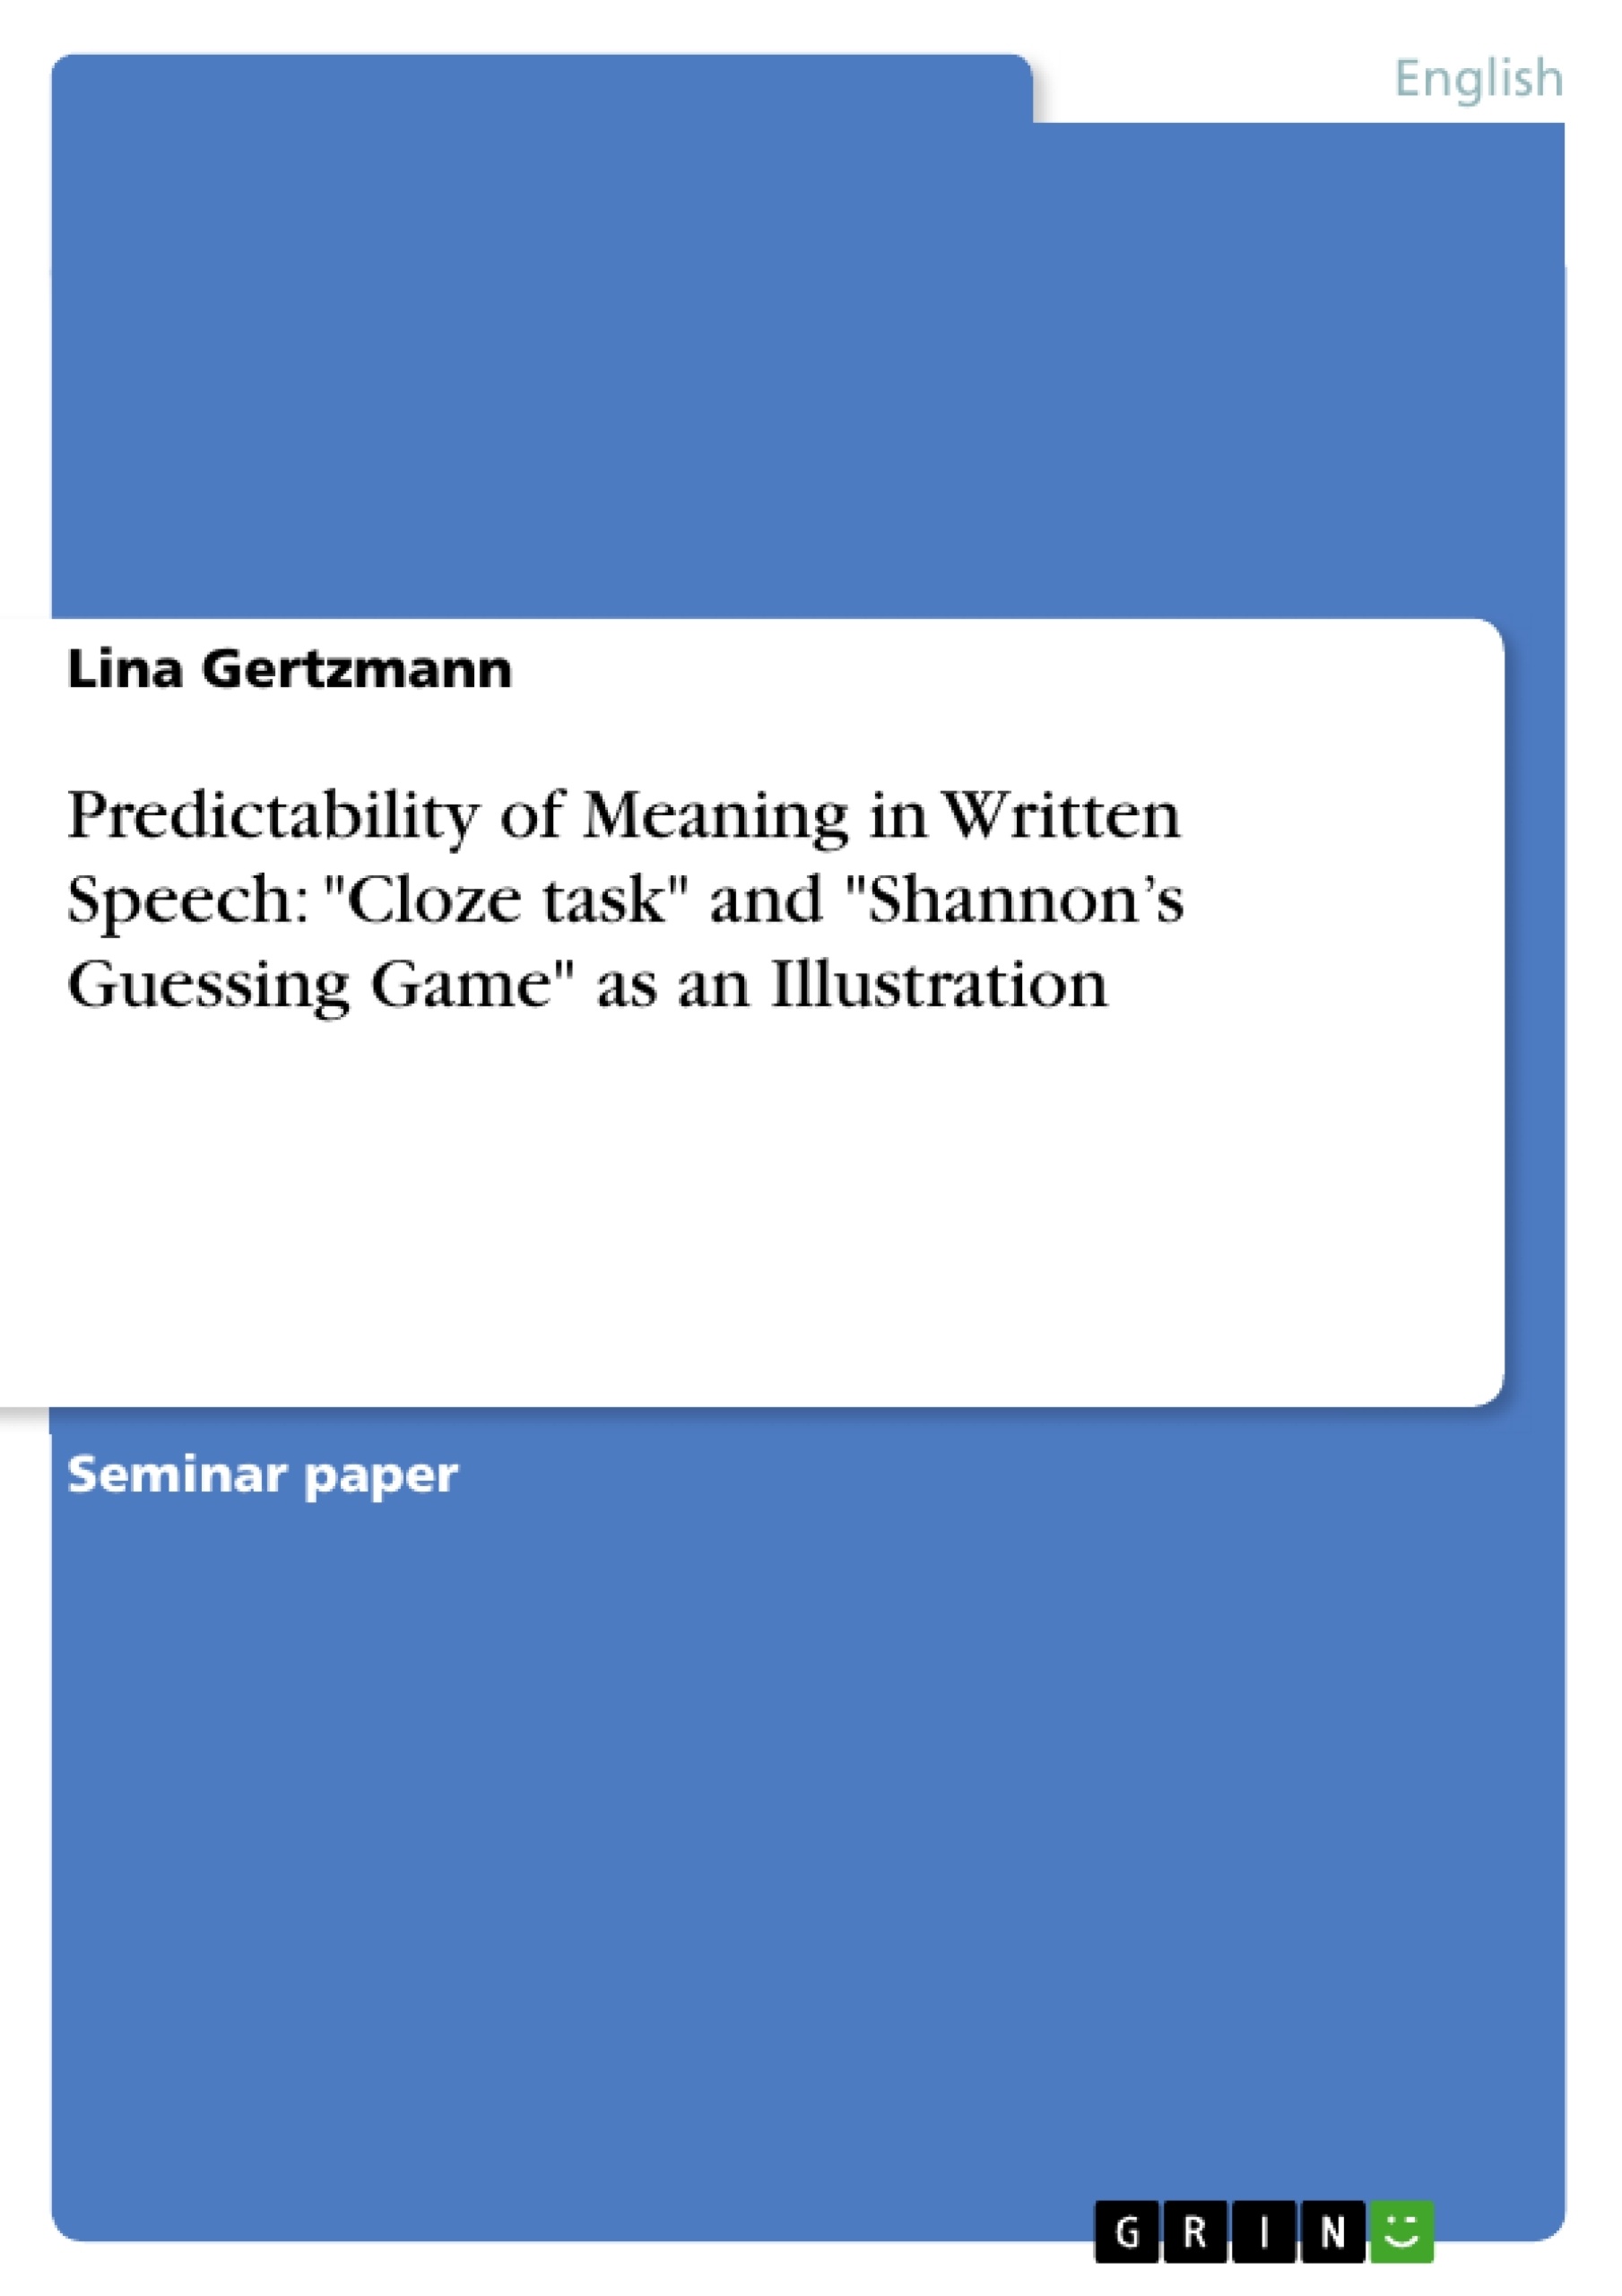 Title: Predictability of Meaning in Written Speech: "Cloze task" and "Shannon’s Guessing Game" as an Illustration